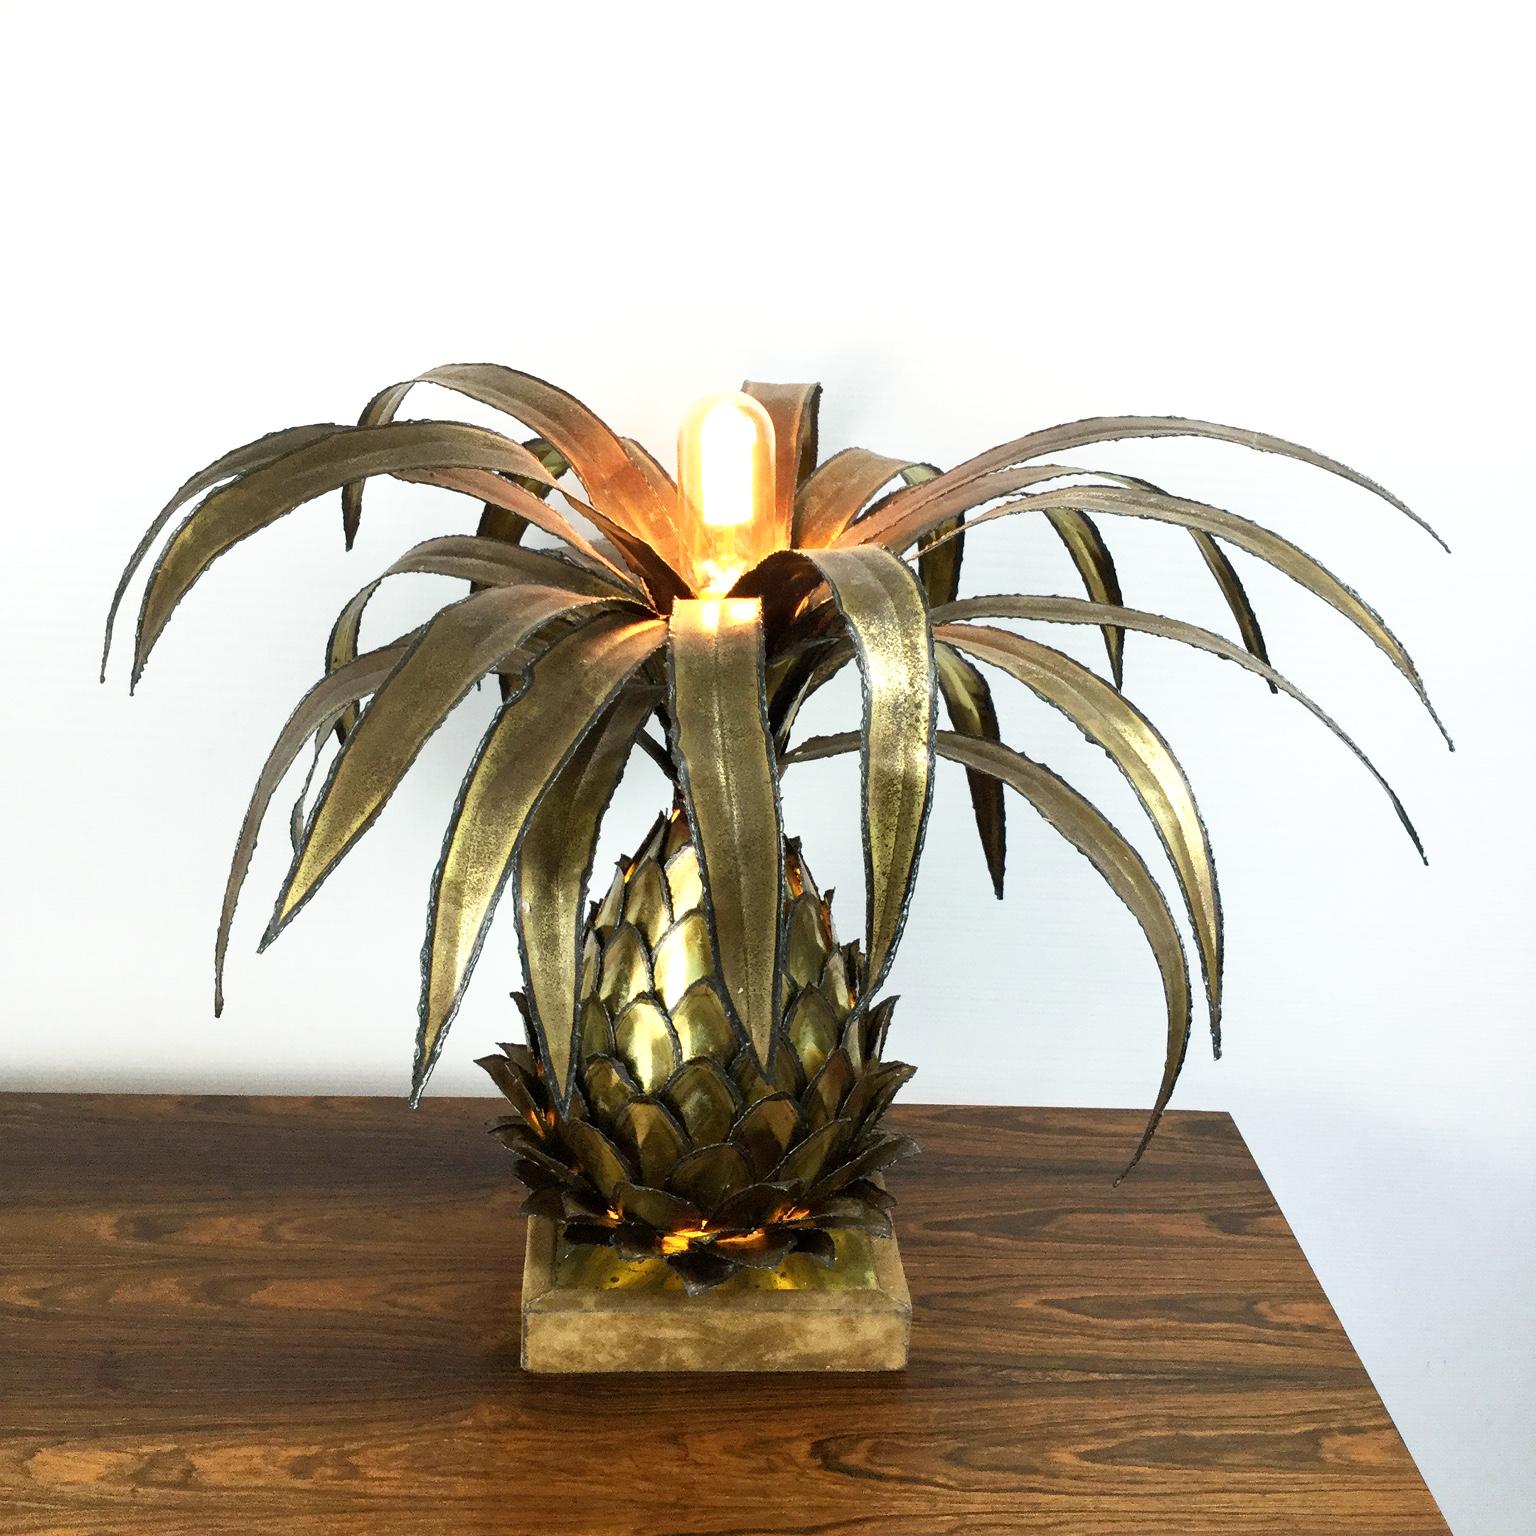 1960s French brass Maison Jansen pineapple table lamp
with one bulb on a top and another one inside.